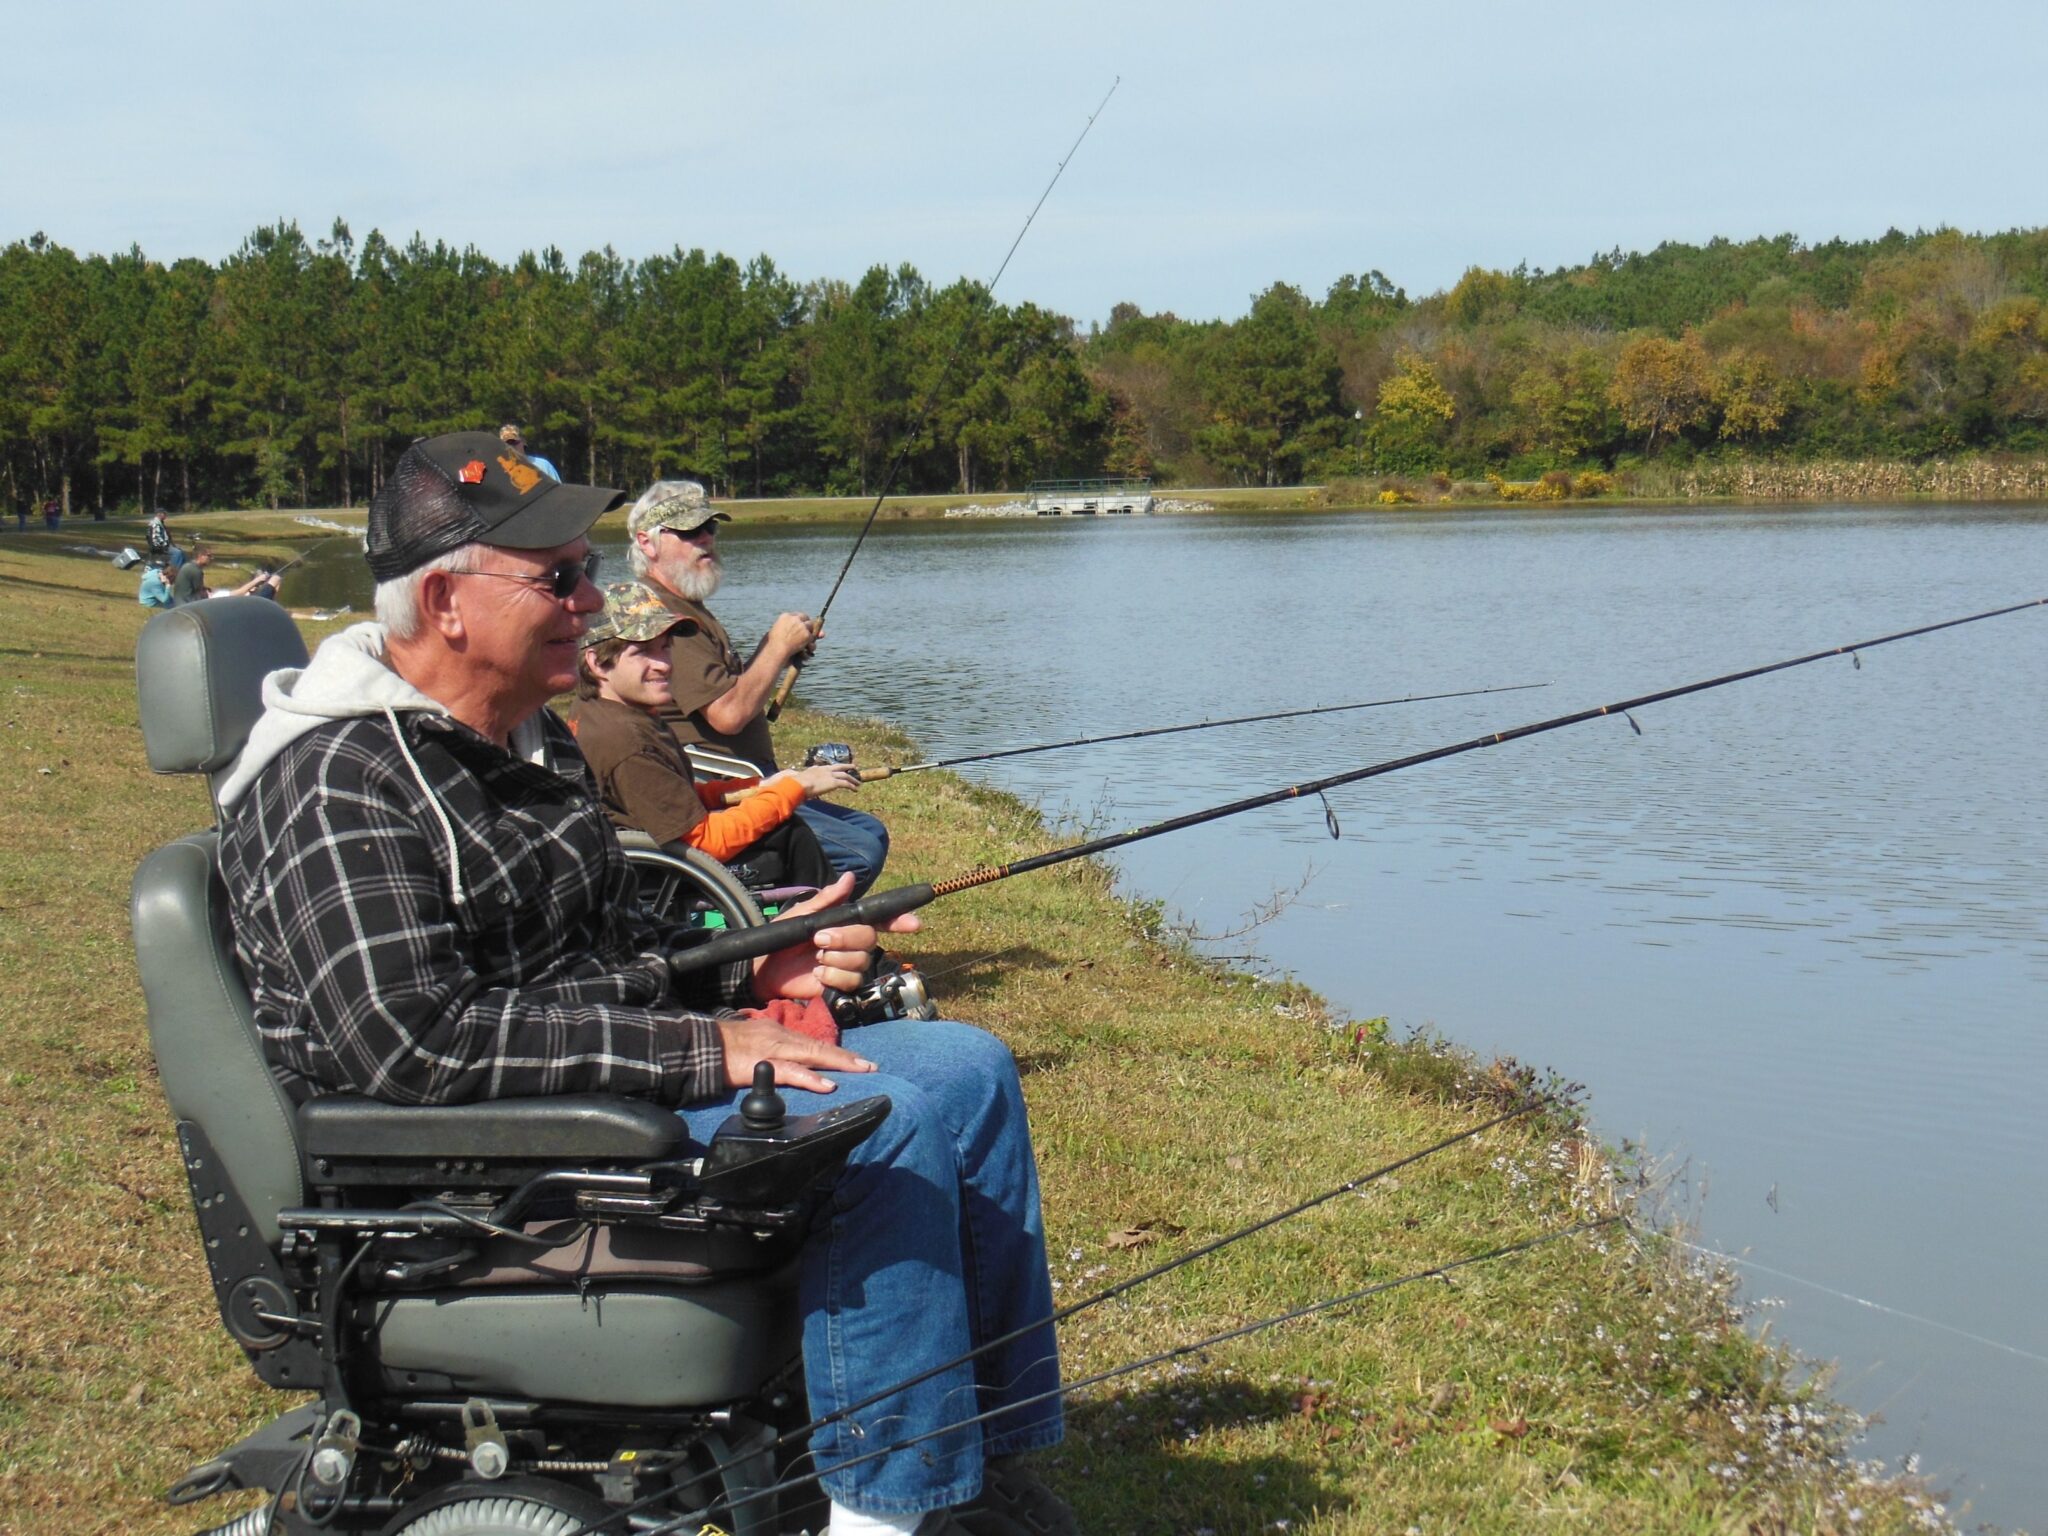 The City of Goose Creek Recreation Department’s Therapeutic Fishing Rodeo is set for 10 a.m. to 2 p.m. on Saturday, Nov. 12 at the Municipal Center.